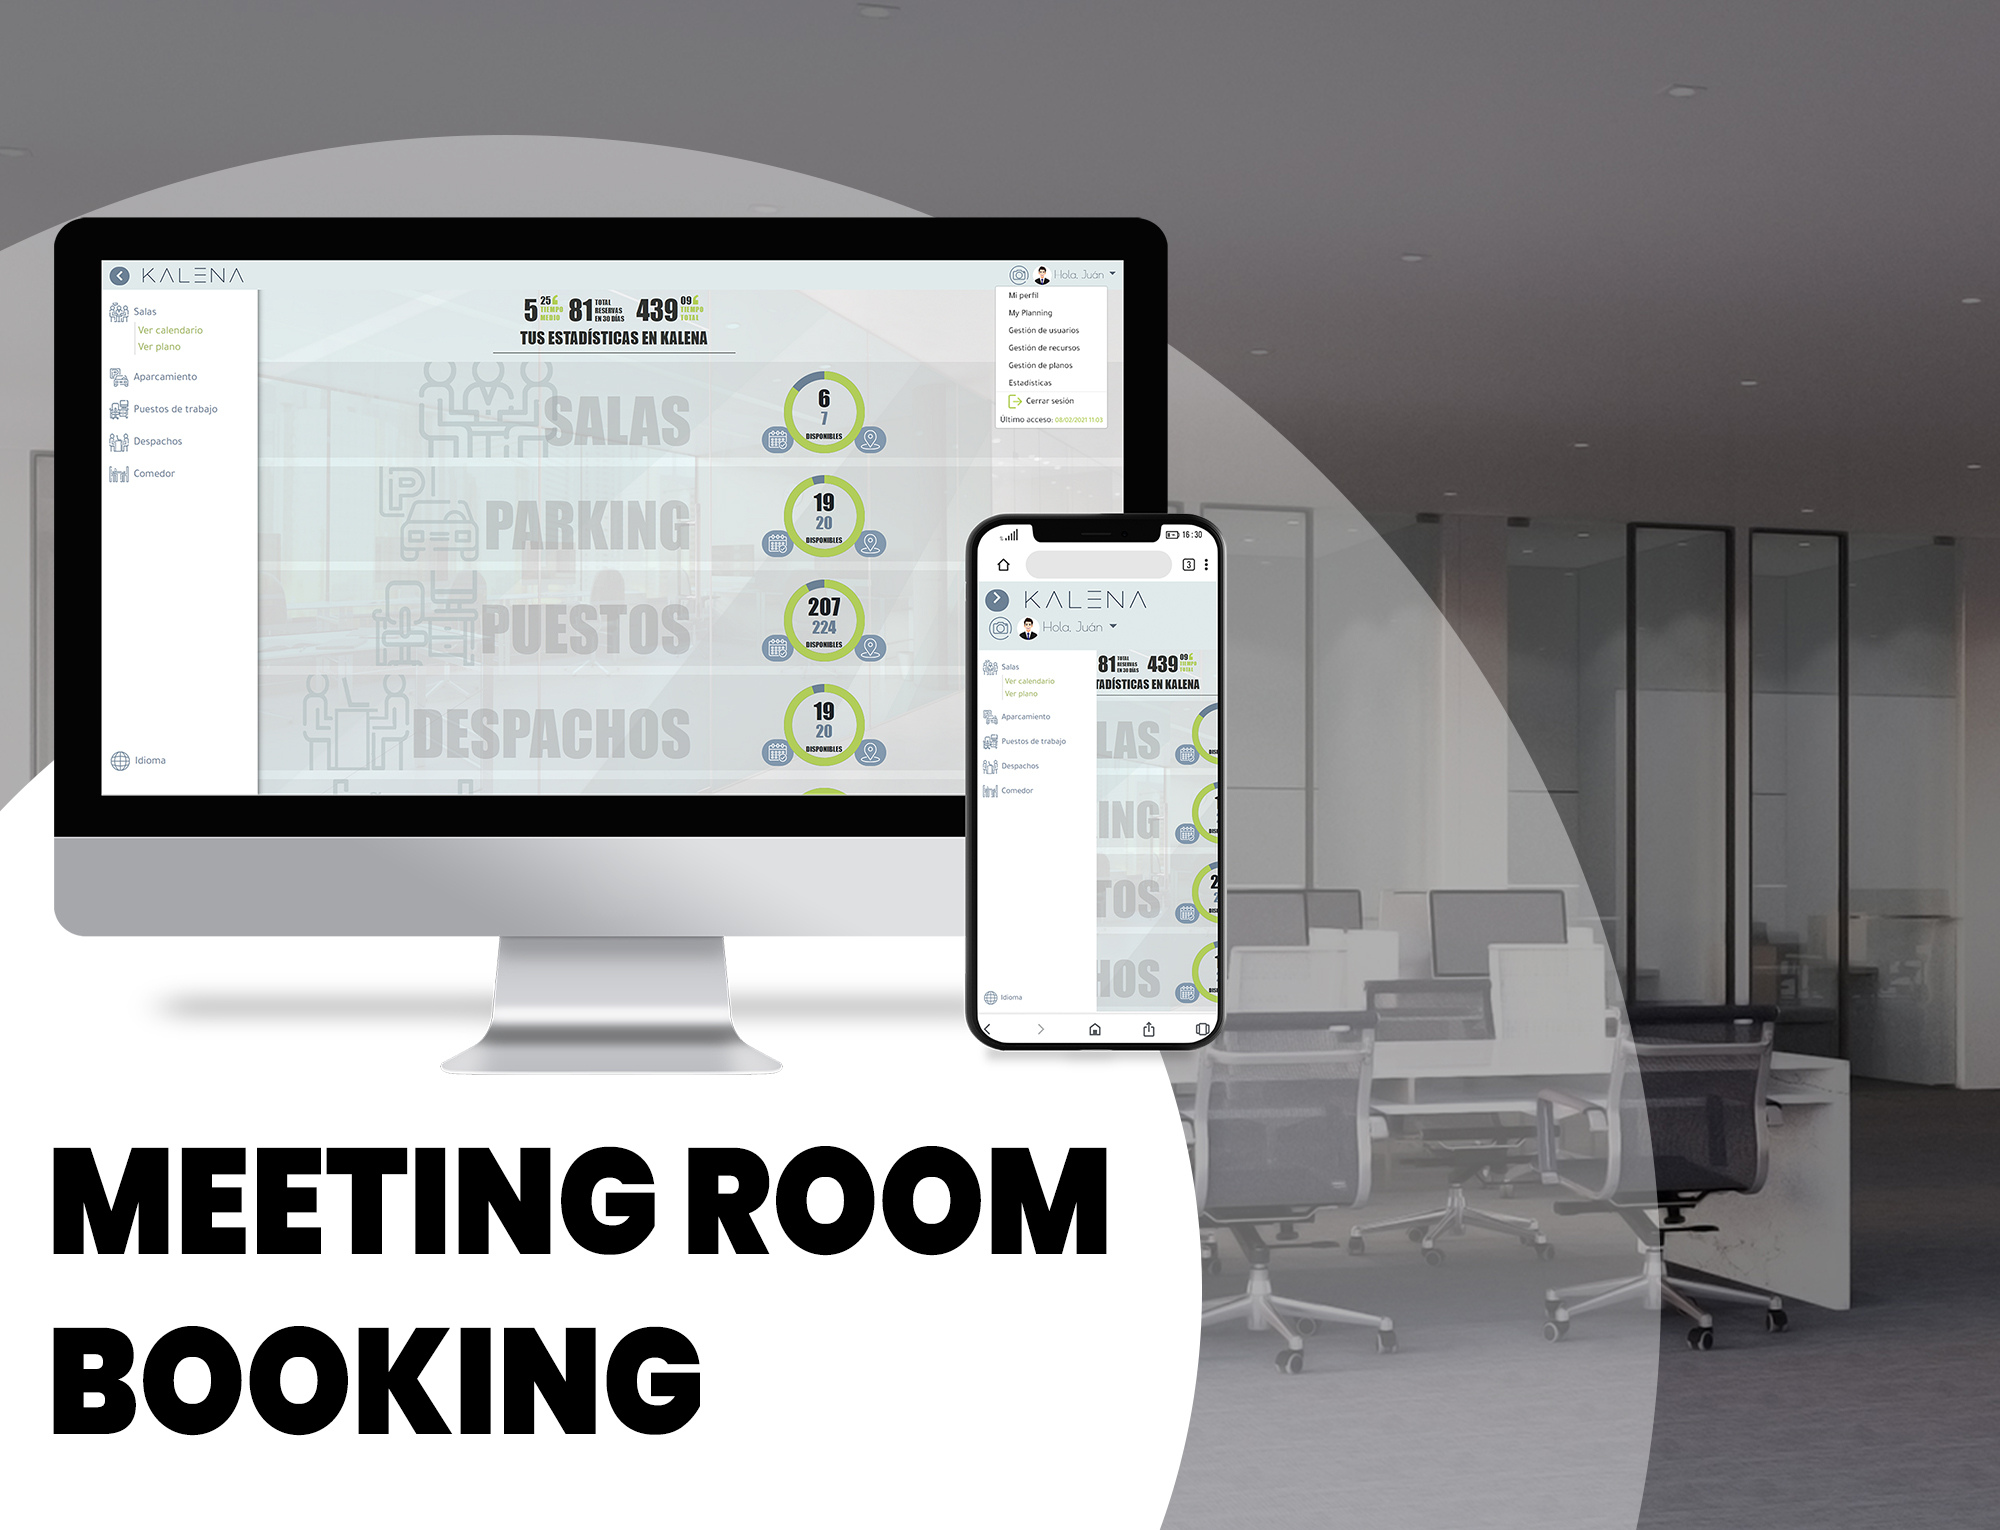 KALENA is a software solution for schedule the booking of your company's corporate spaces and resources, such as meeting rooms, workspaces and parking spaces.